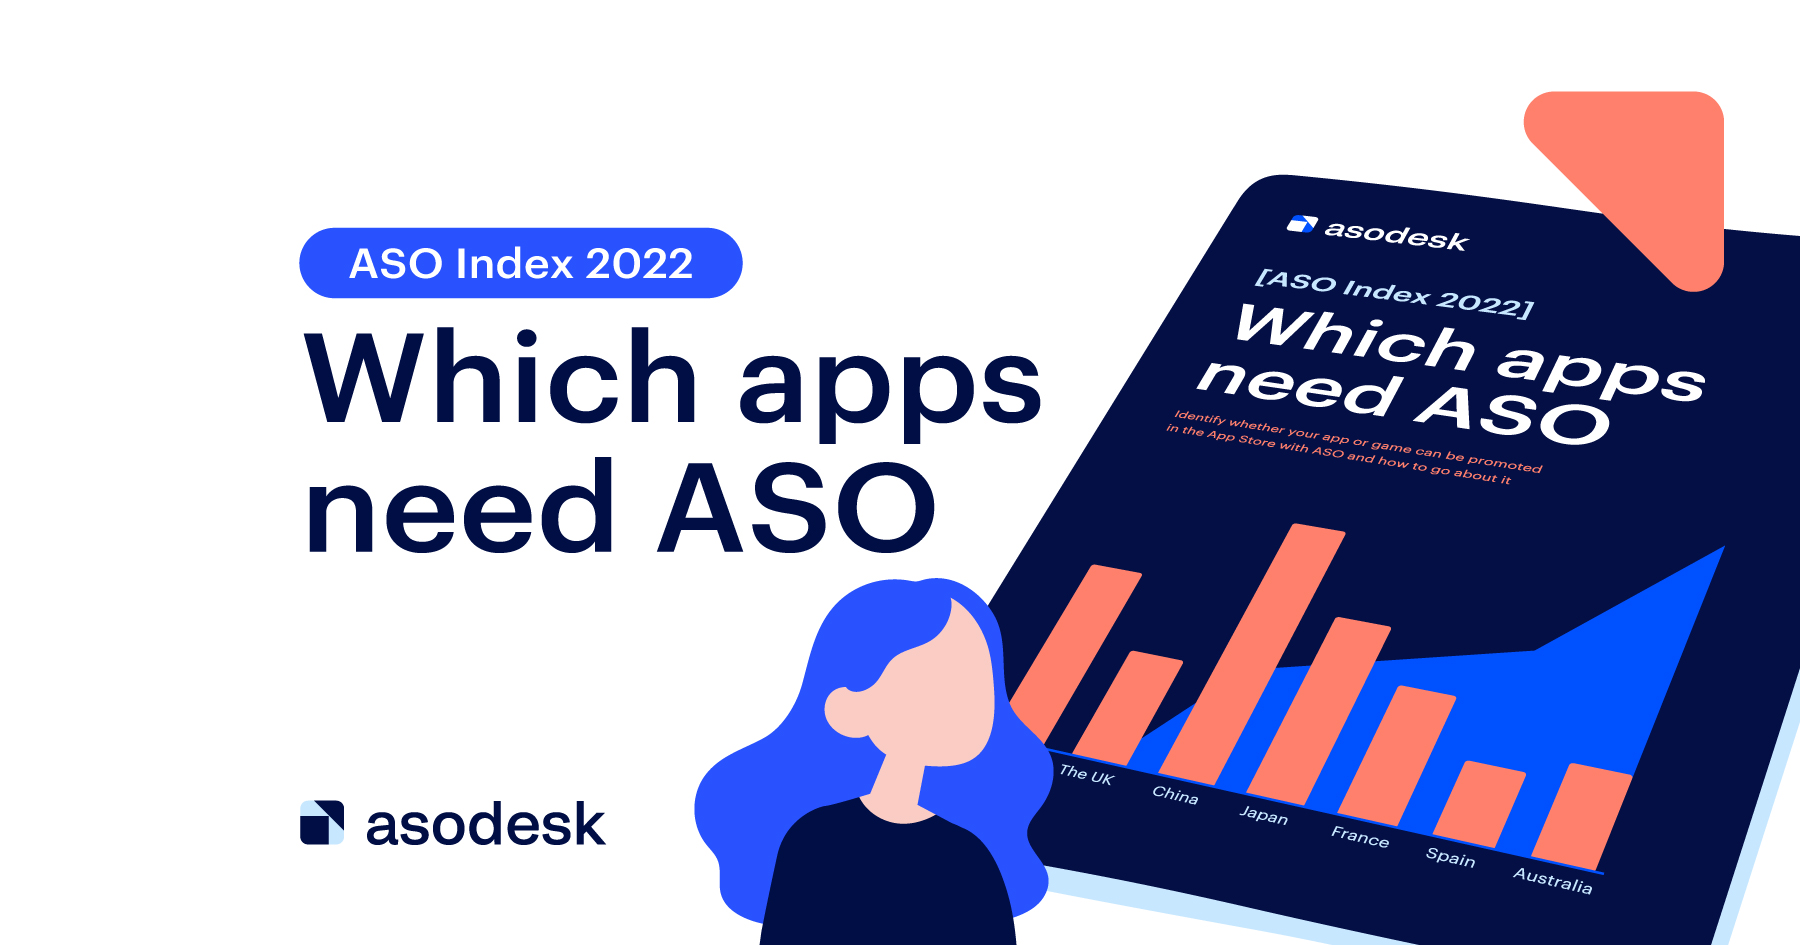 Which apps need ASO: ASO Index 2022 study